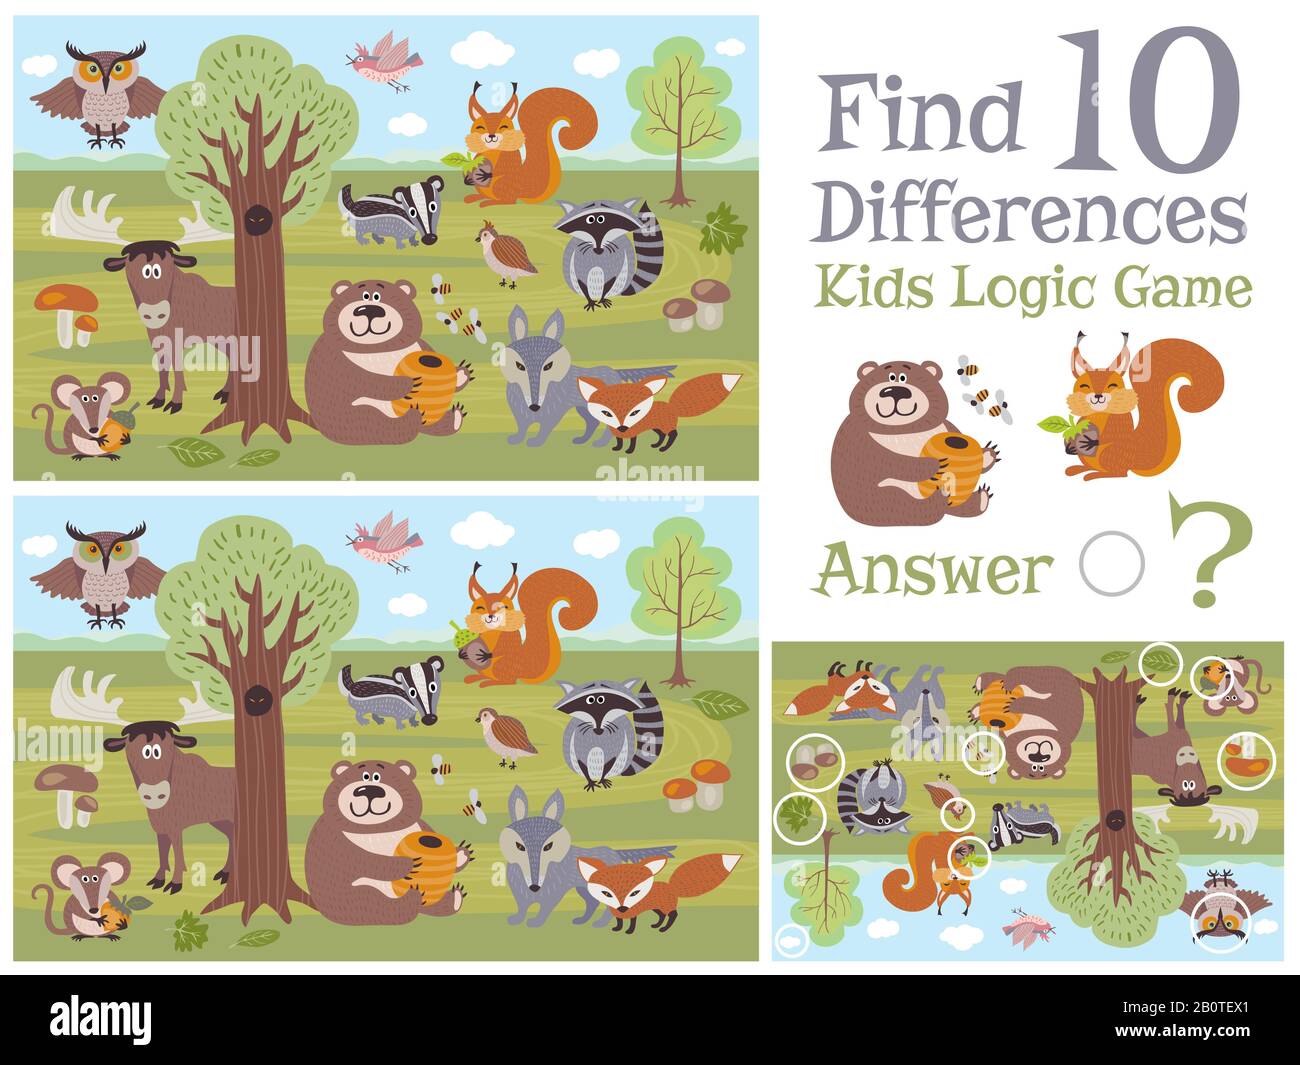 Find differences educational kids game with forest animal characters vector illustration. Children game template banner Stock Vector